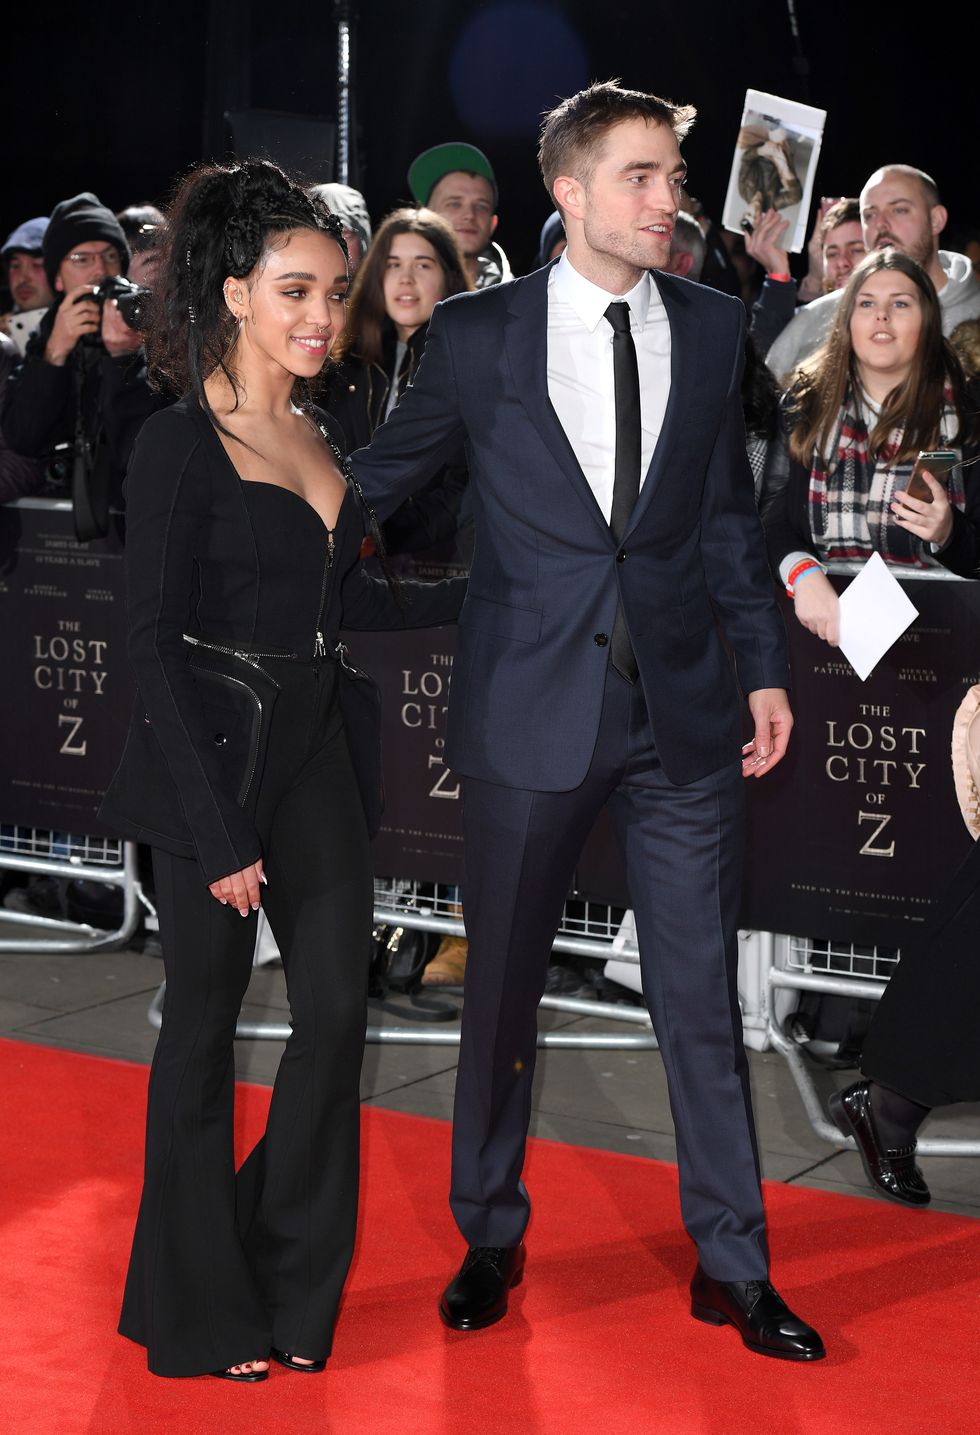 FKA Twigs and Robert Pattinson Arrive at the premiere